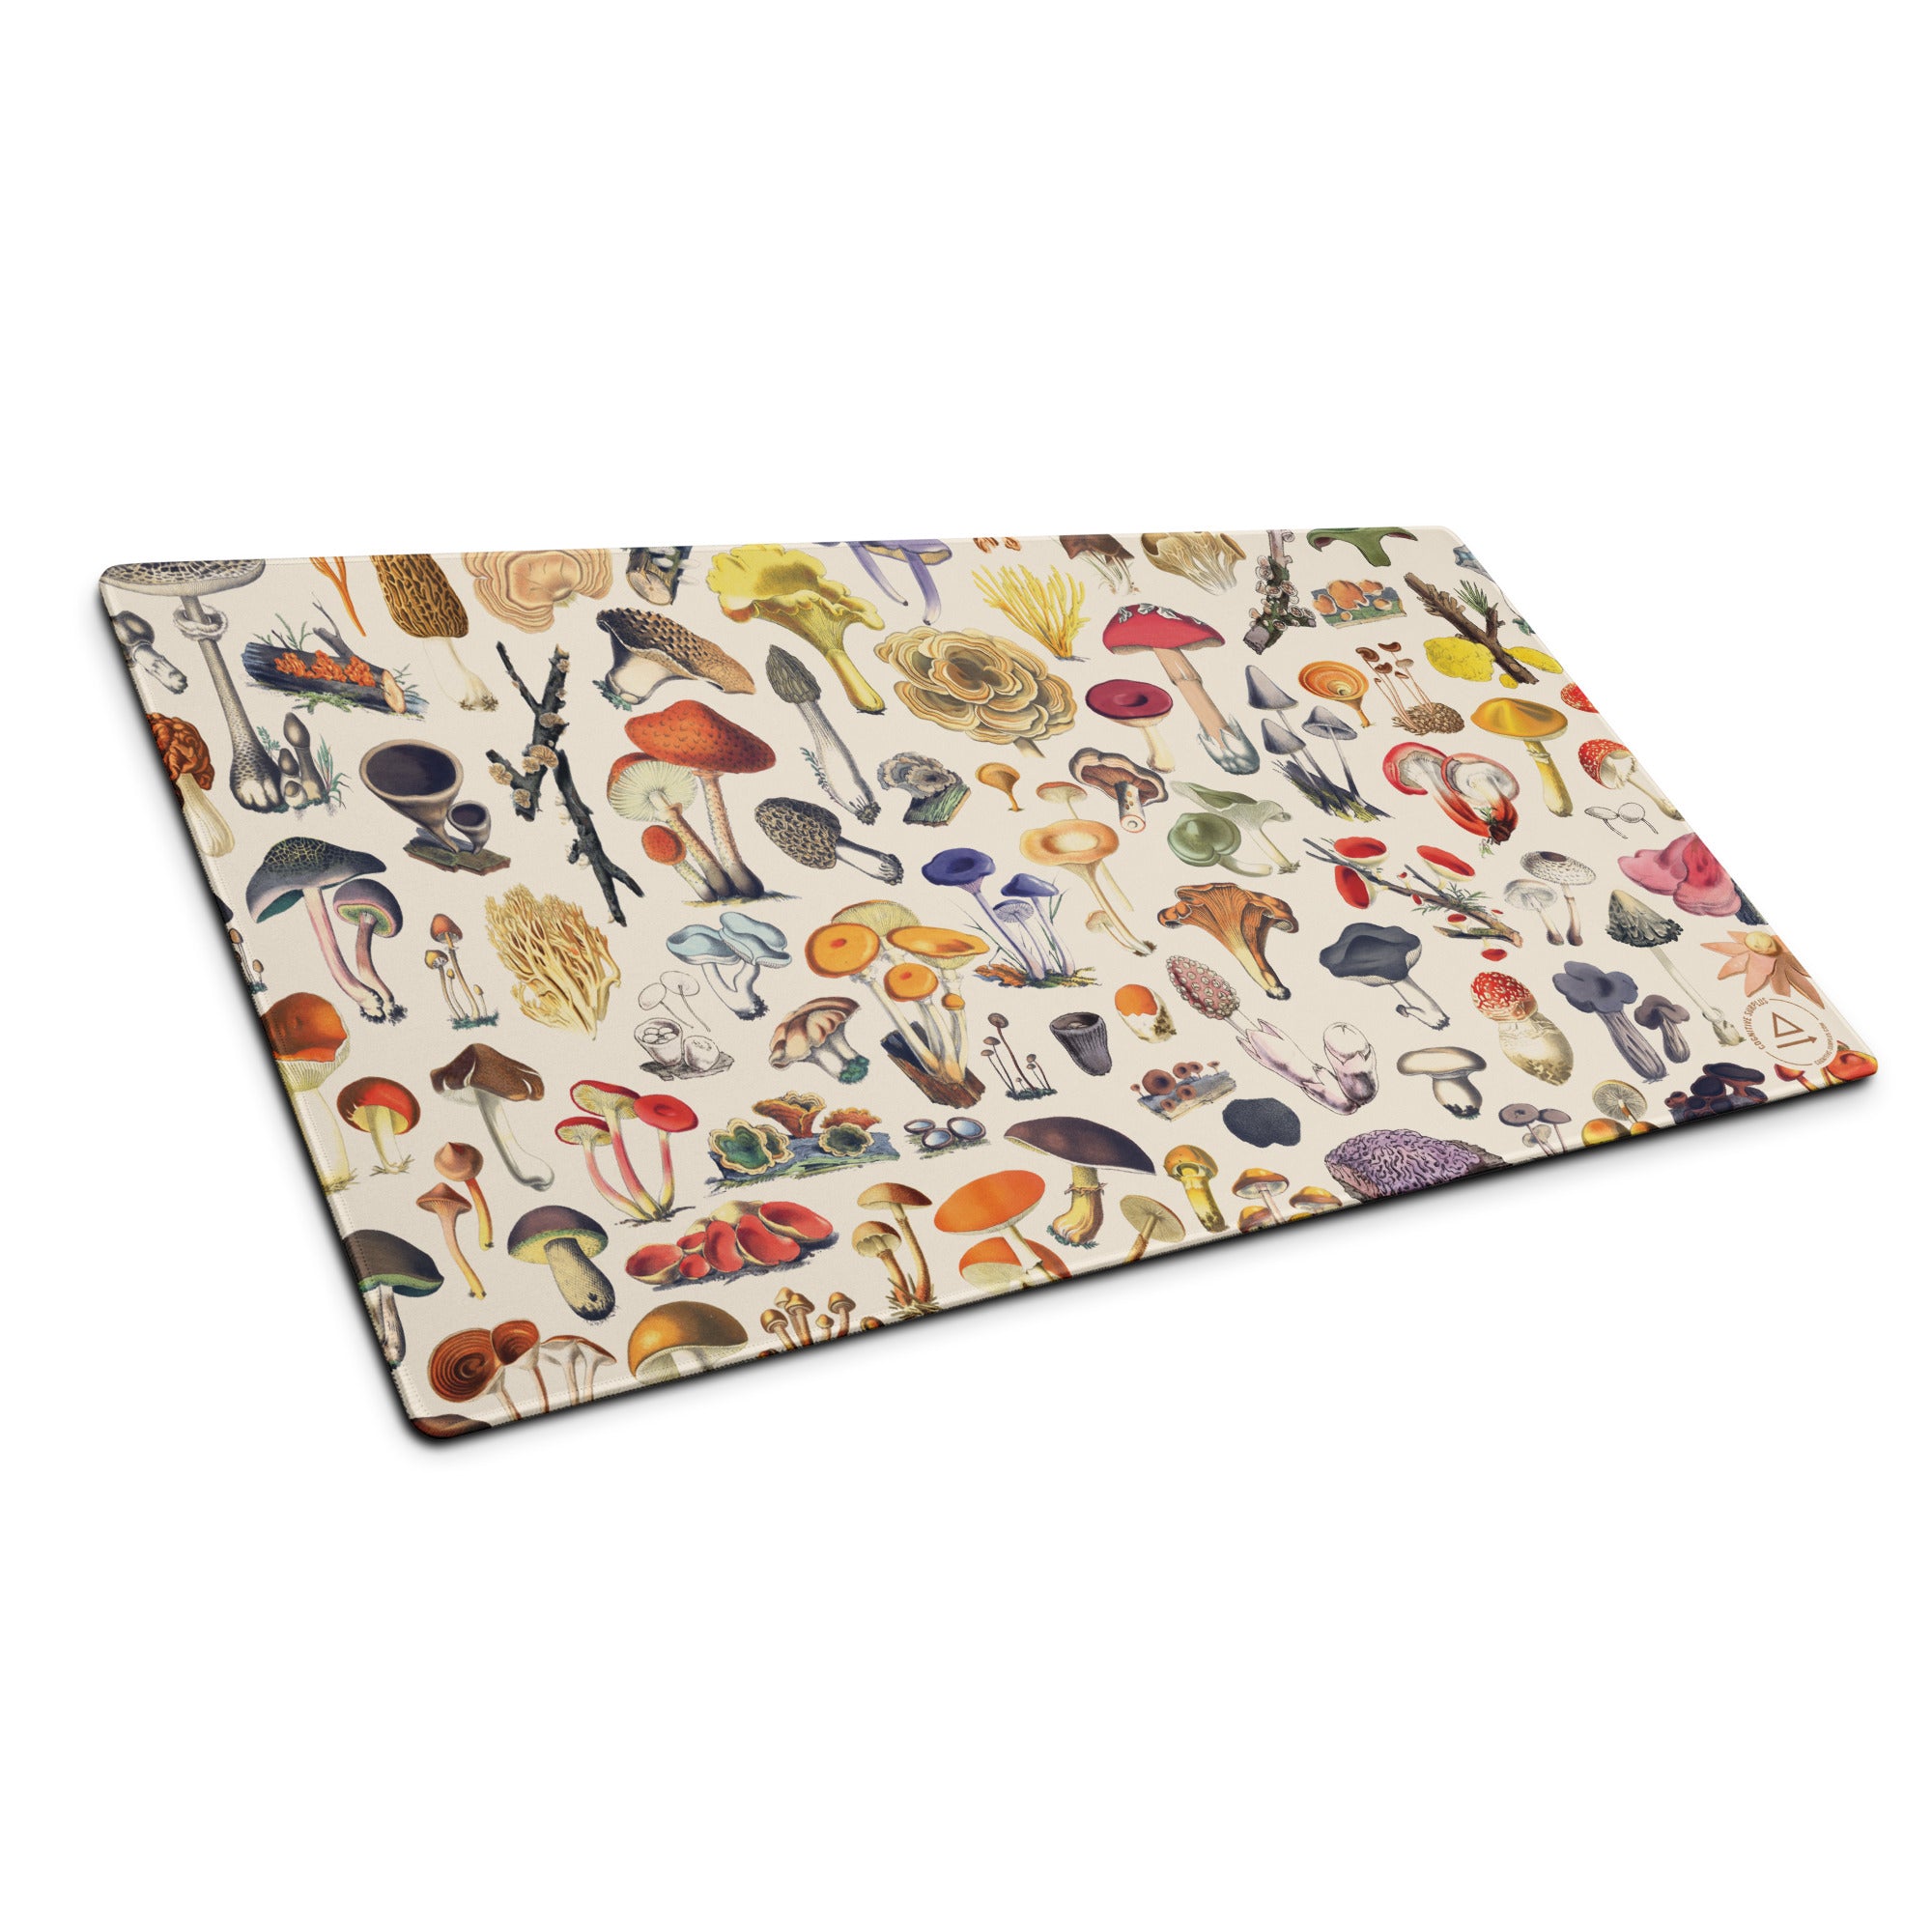 gaming-mouse-pad-white-36x18-front-6595debd7ad5e.jpg